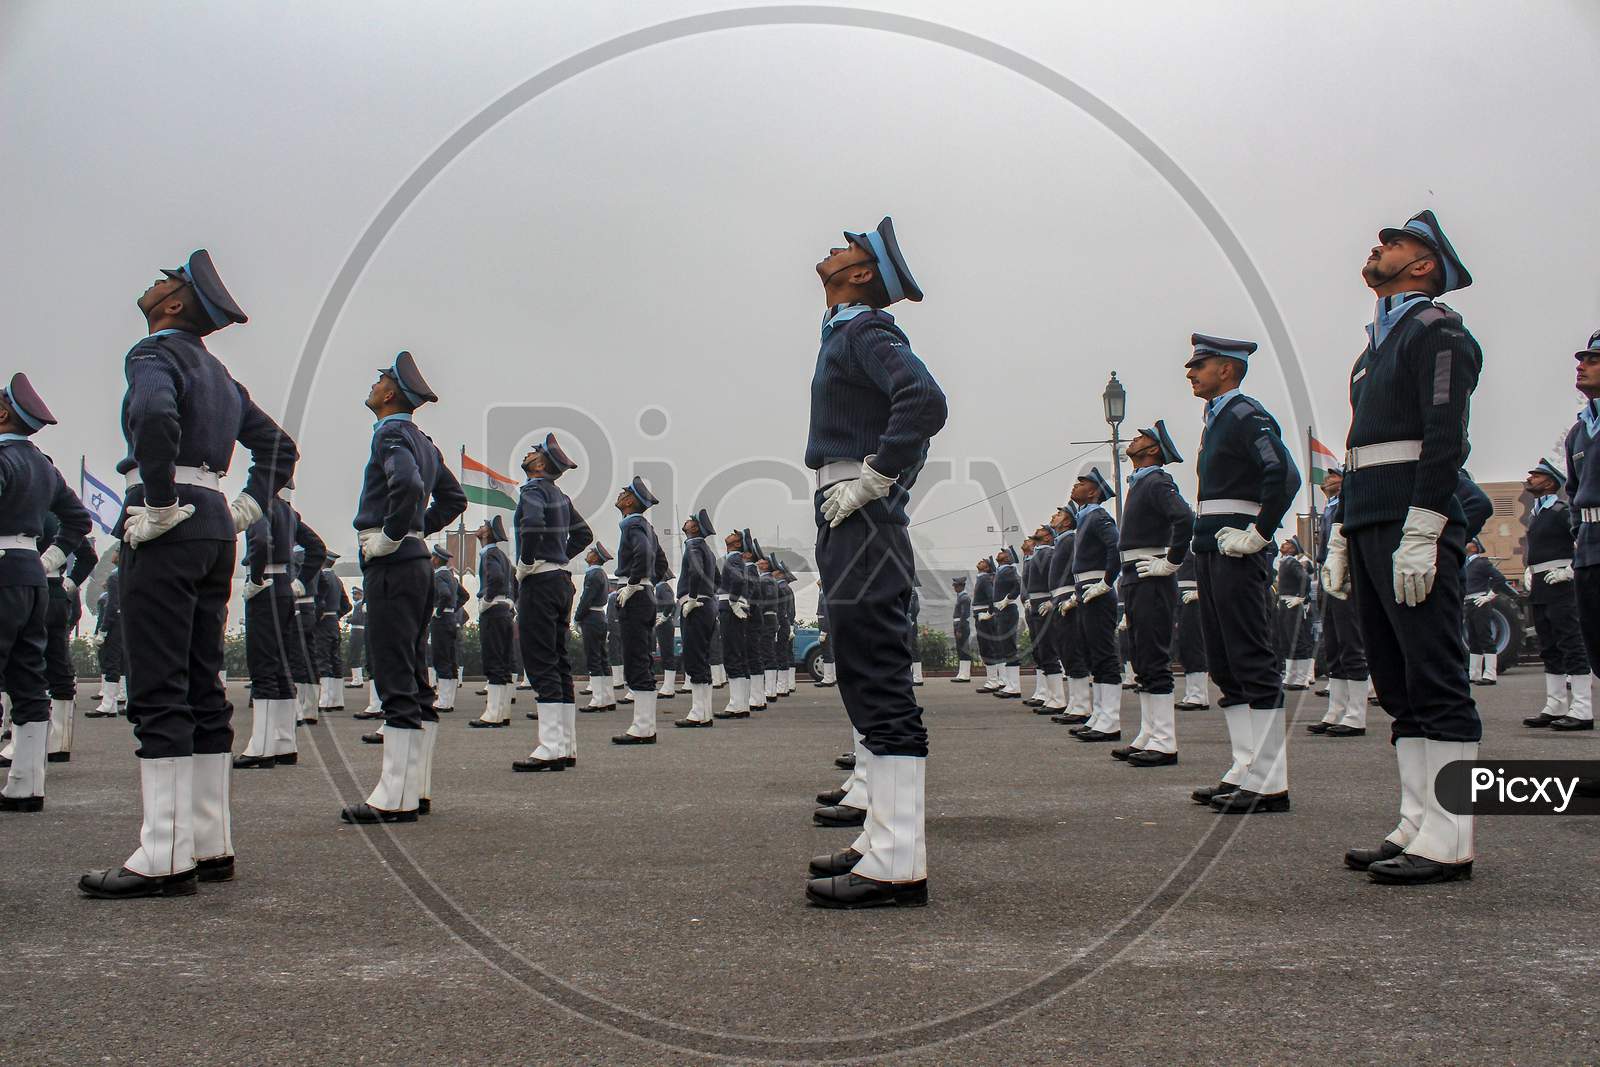 India Gate, New Delhi, India, January-2020: Soldiers Of Indian Army Marching At Rajpath.A Ceremonial Boulevard As They Take Part In Rehearsal Activities For The Republic Day Parade.